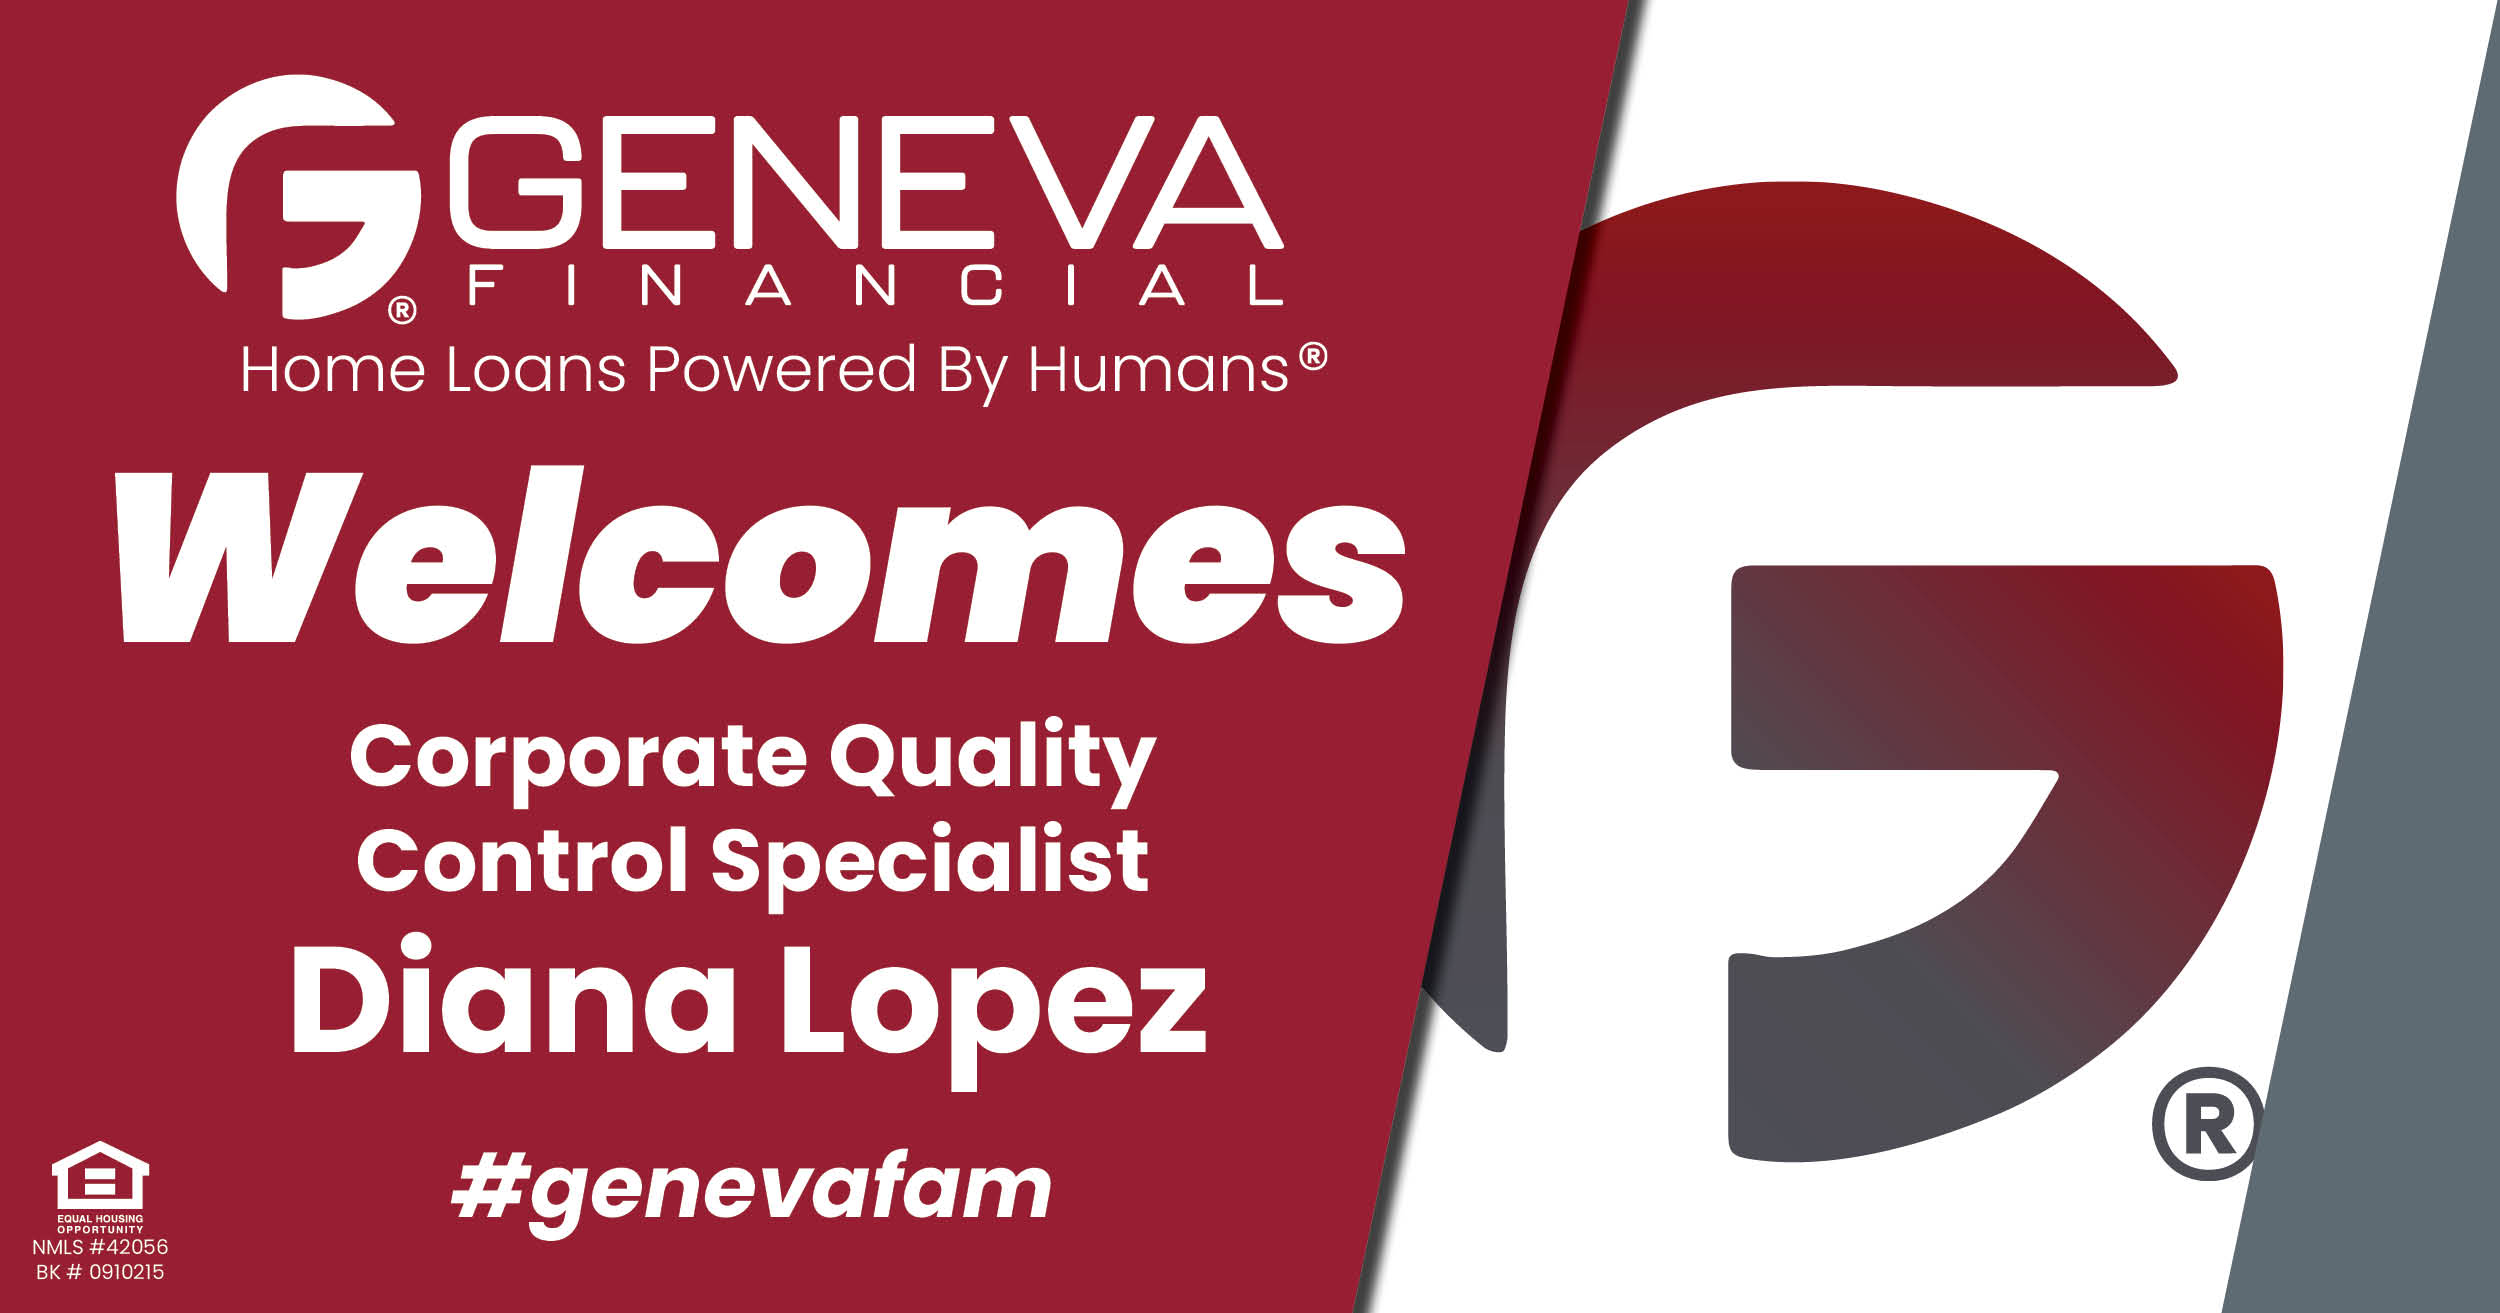 Geneva Financial Welcomes Chief Quality Control Specialist Diana Lopez to continue the human touch that Geneva Financial strives for!